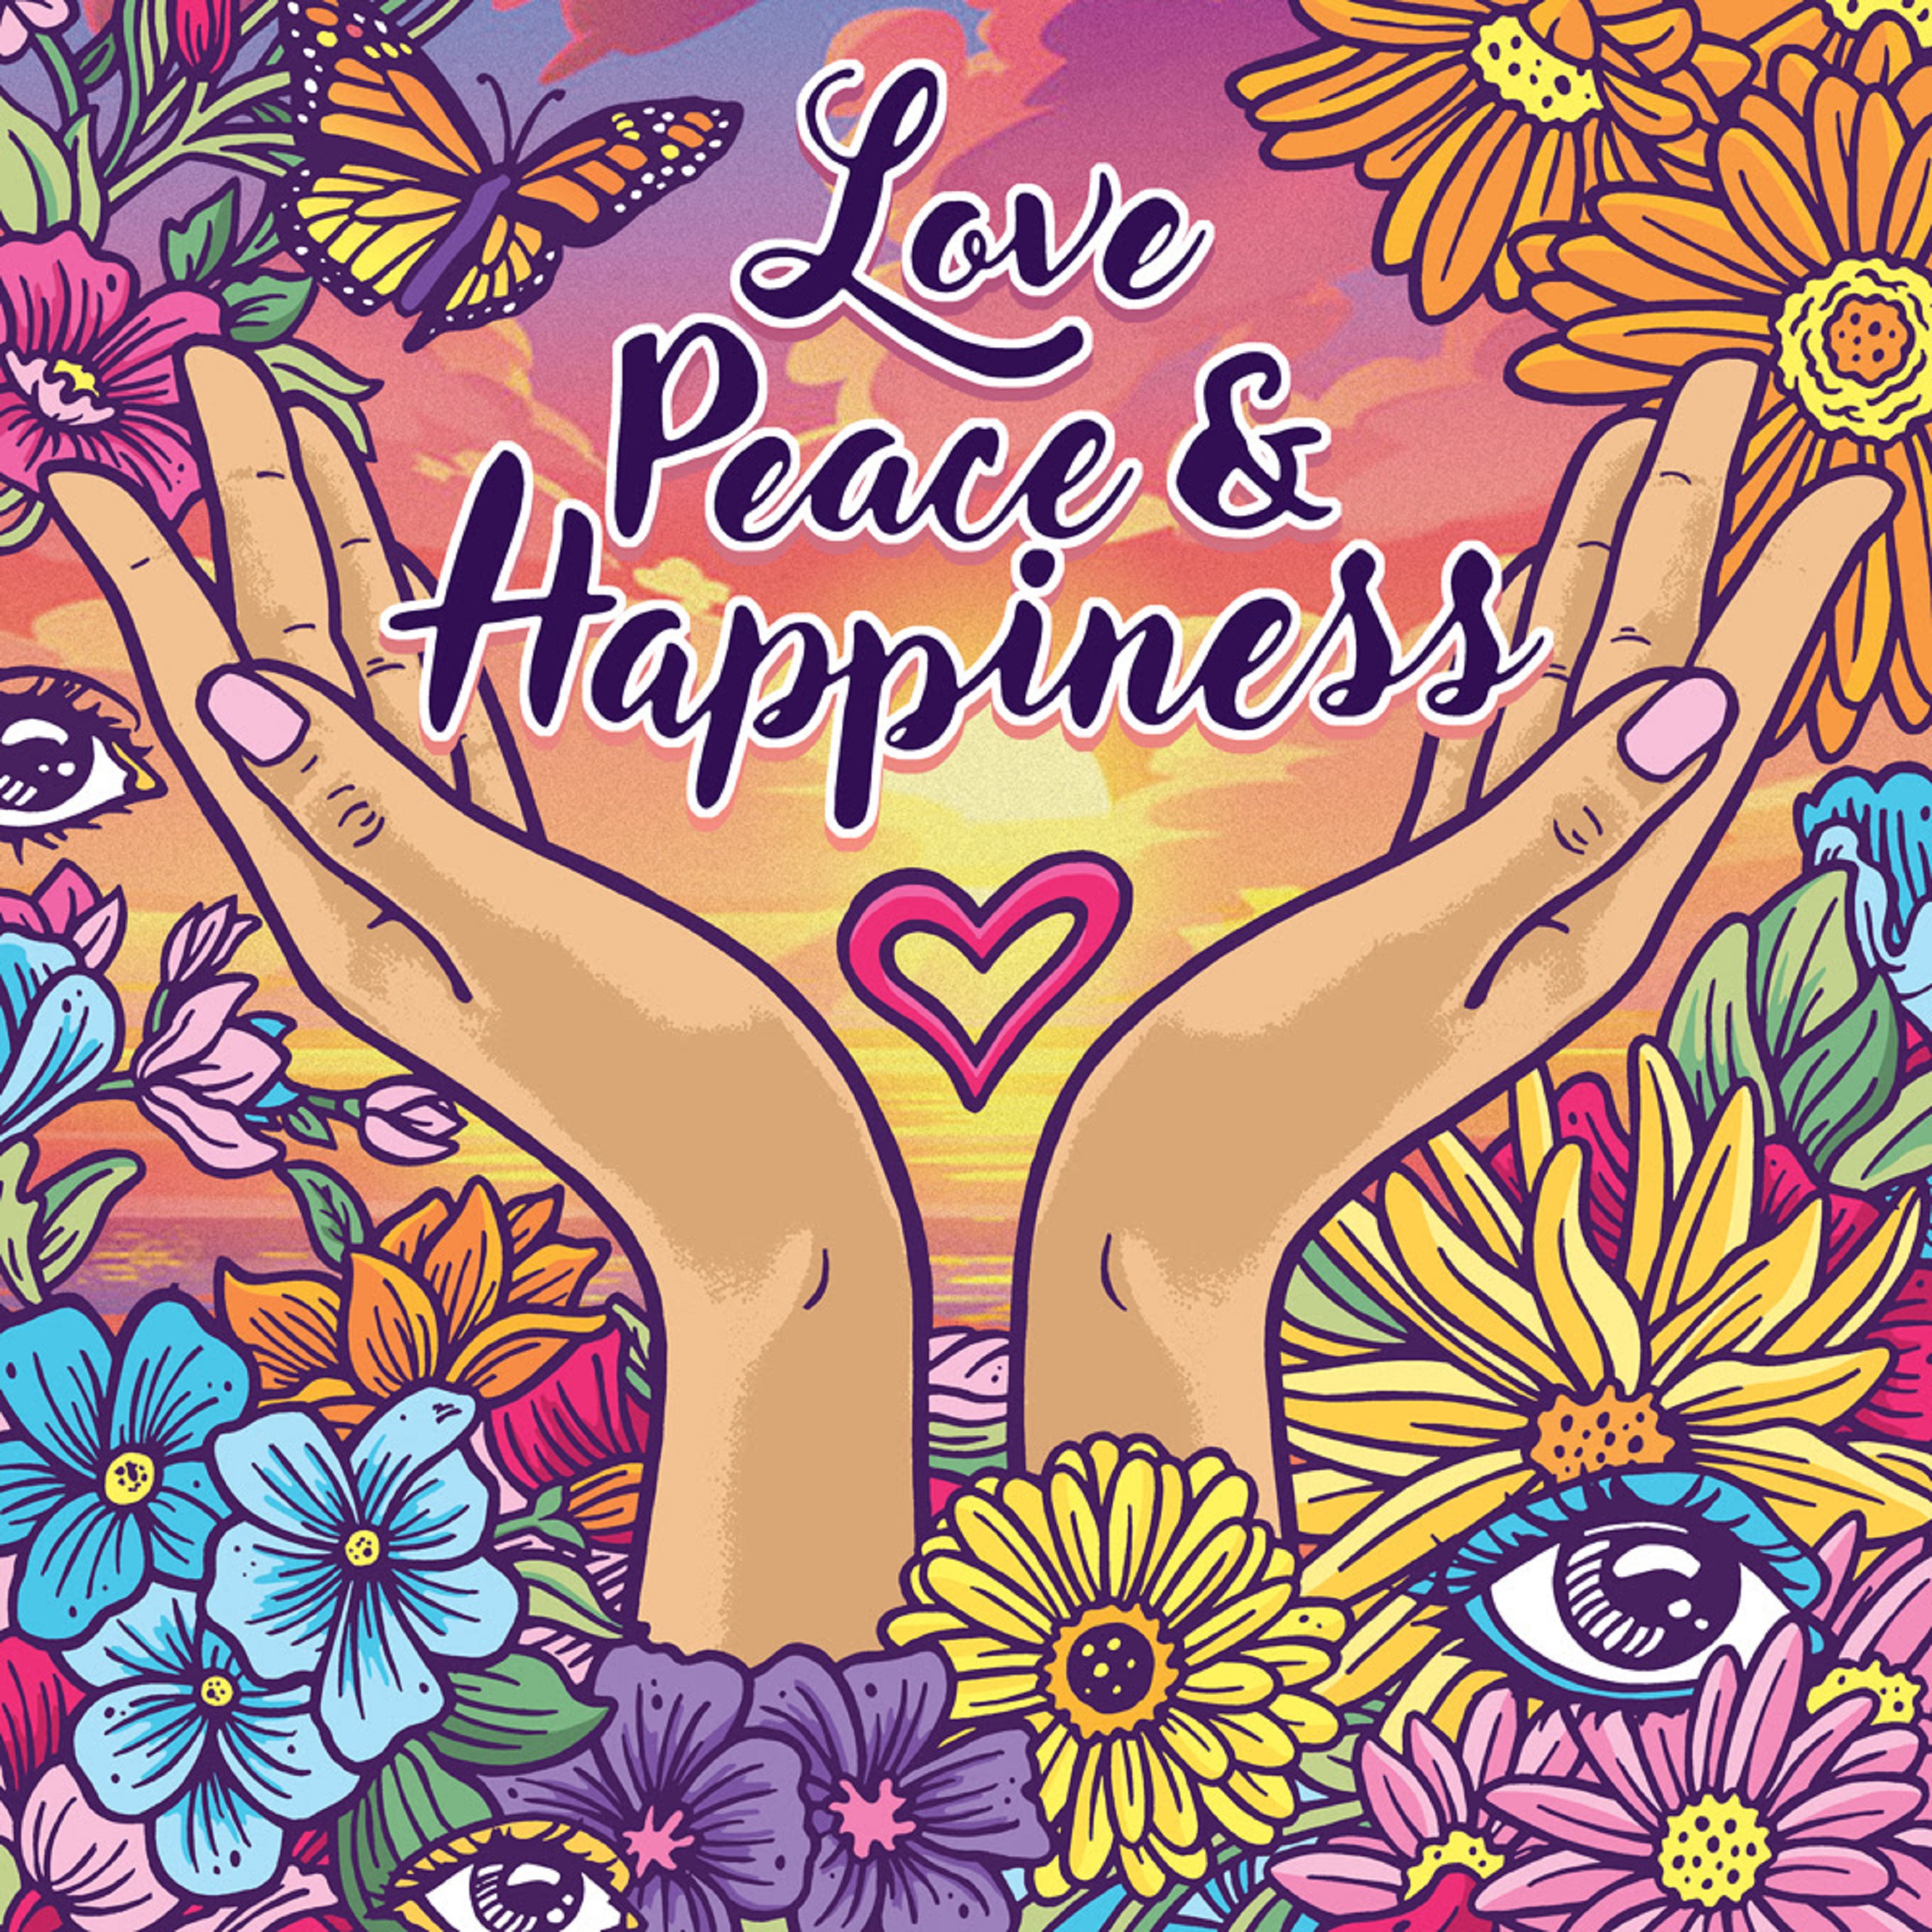 Lester Chambers and Moonalice Revive The Chambers Brothers' Classic “Love, Peace and Happiness”